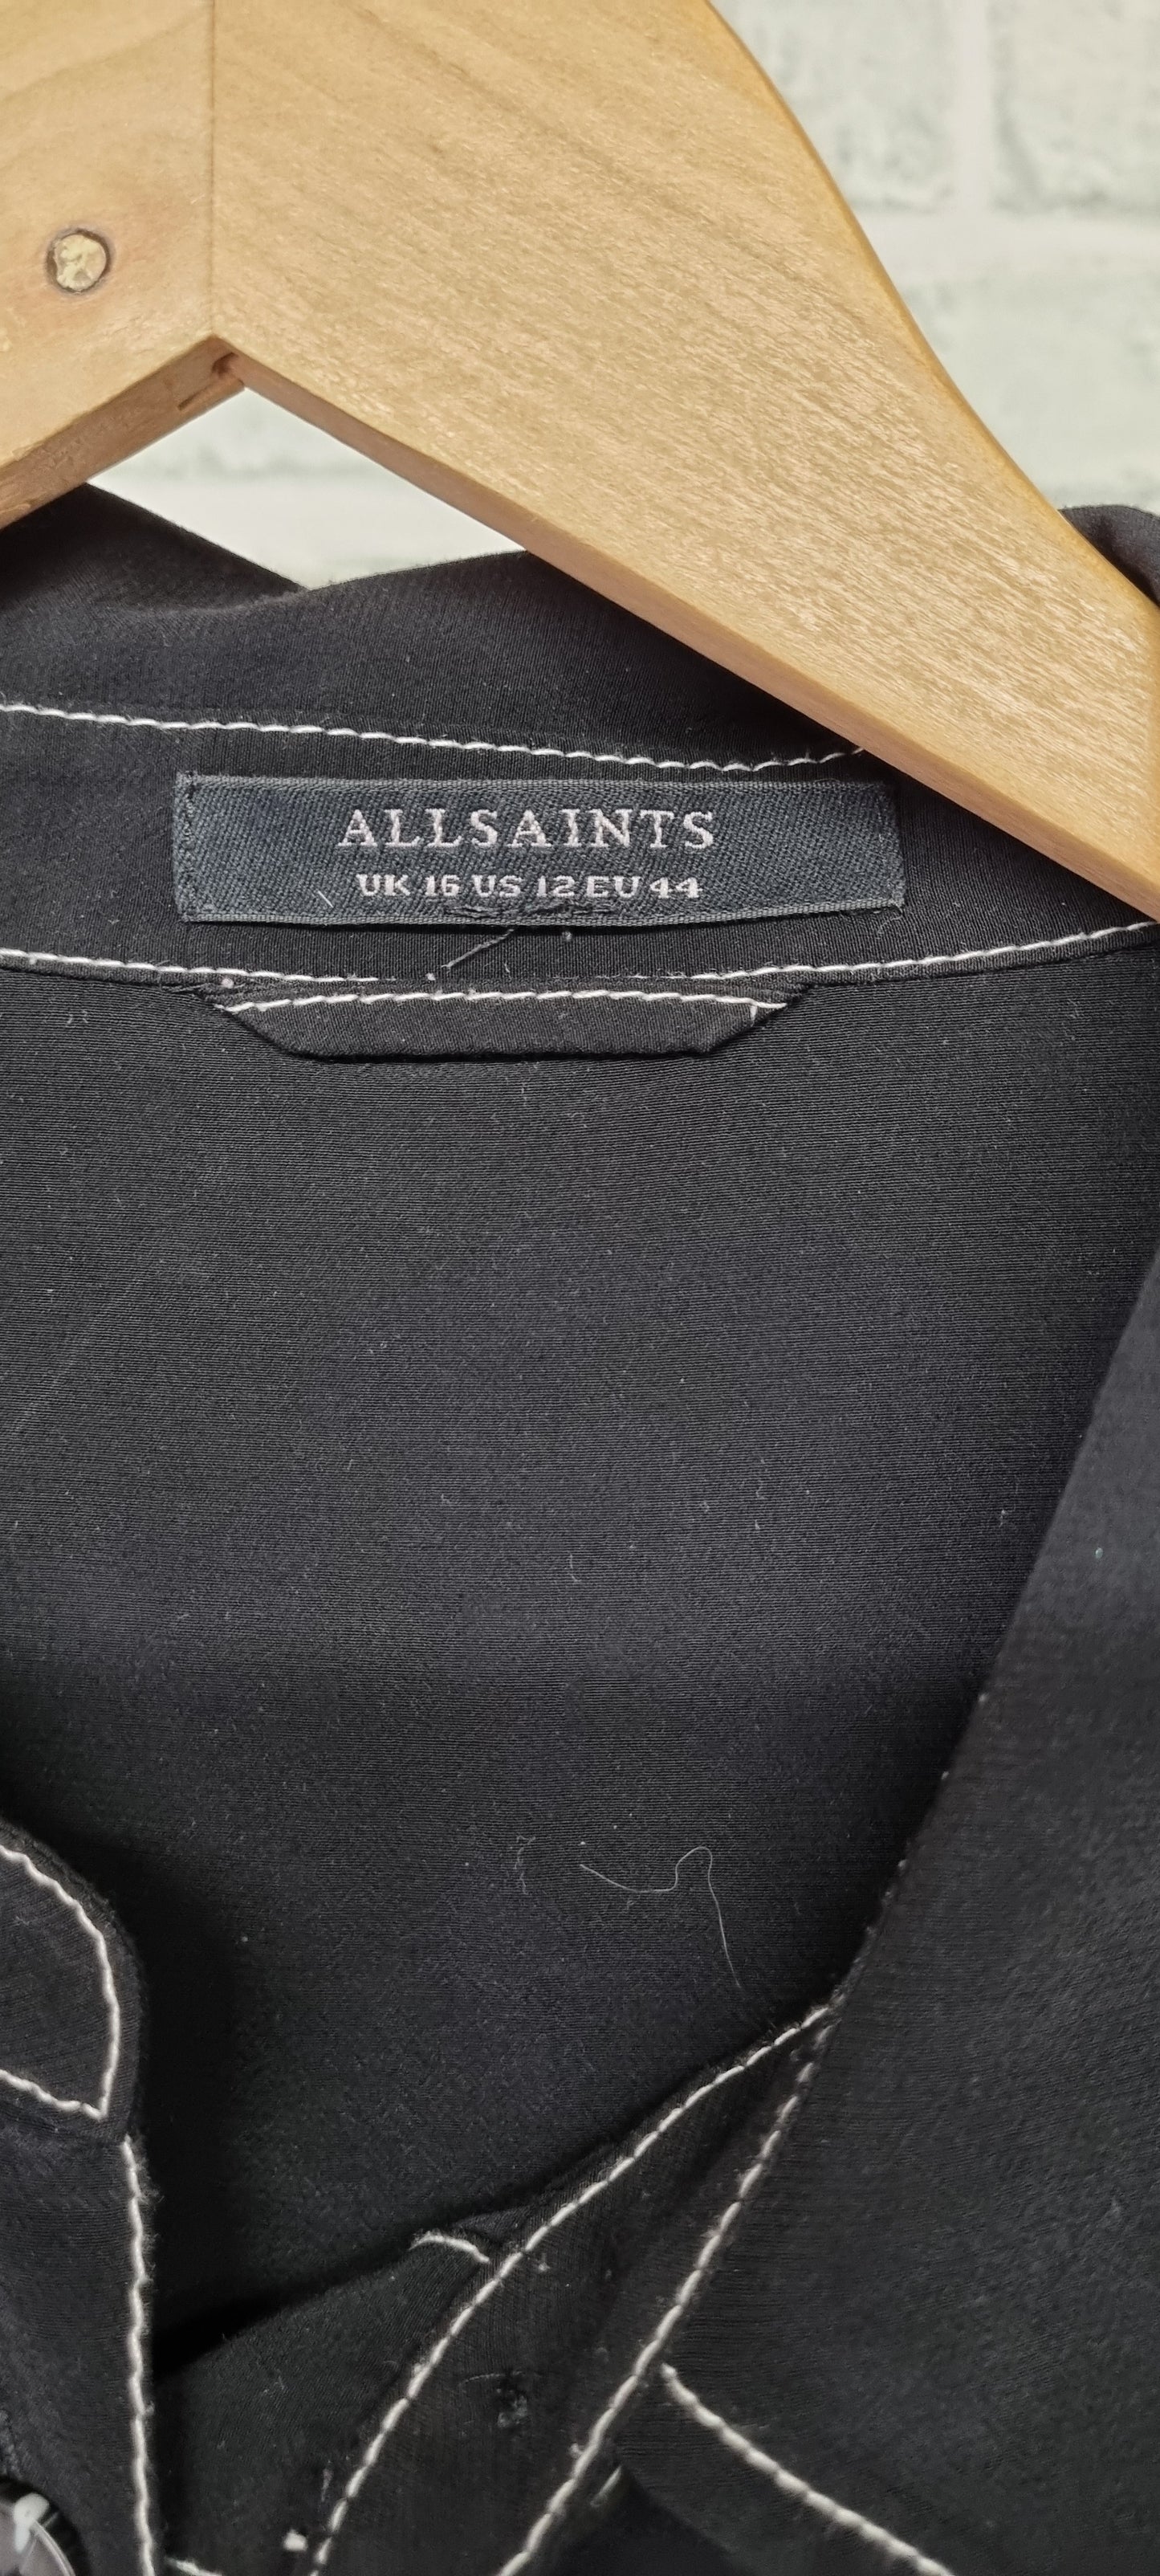 AllSaints Black Oversized Shirt with White Stitching Detail Size 16